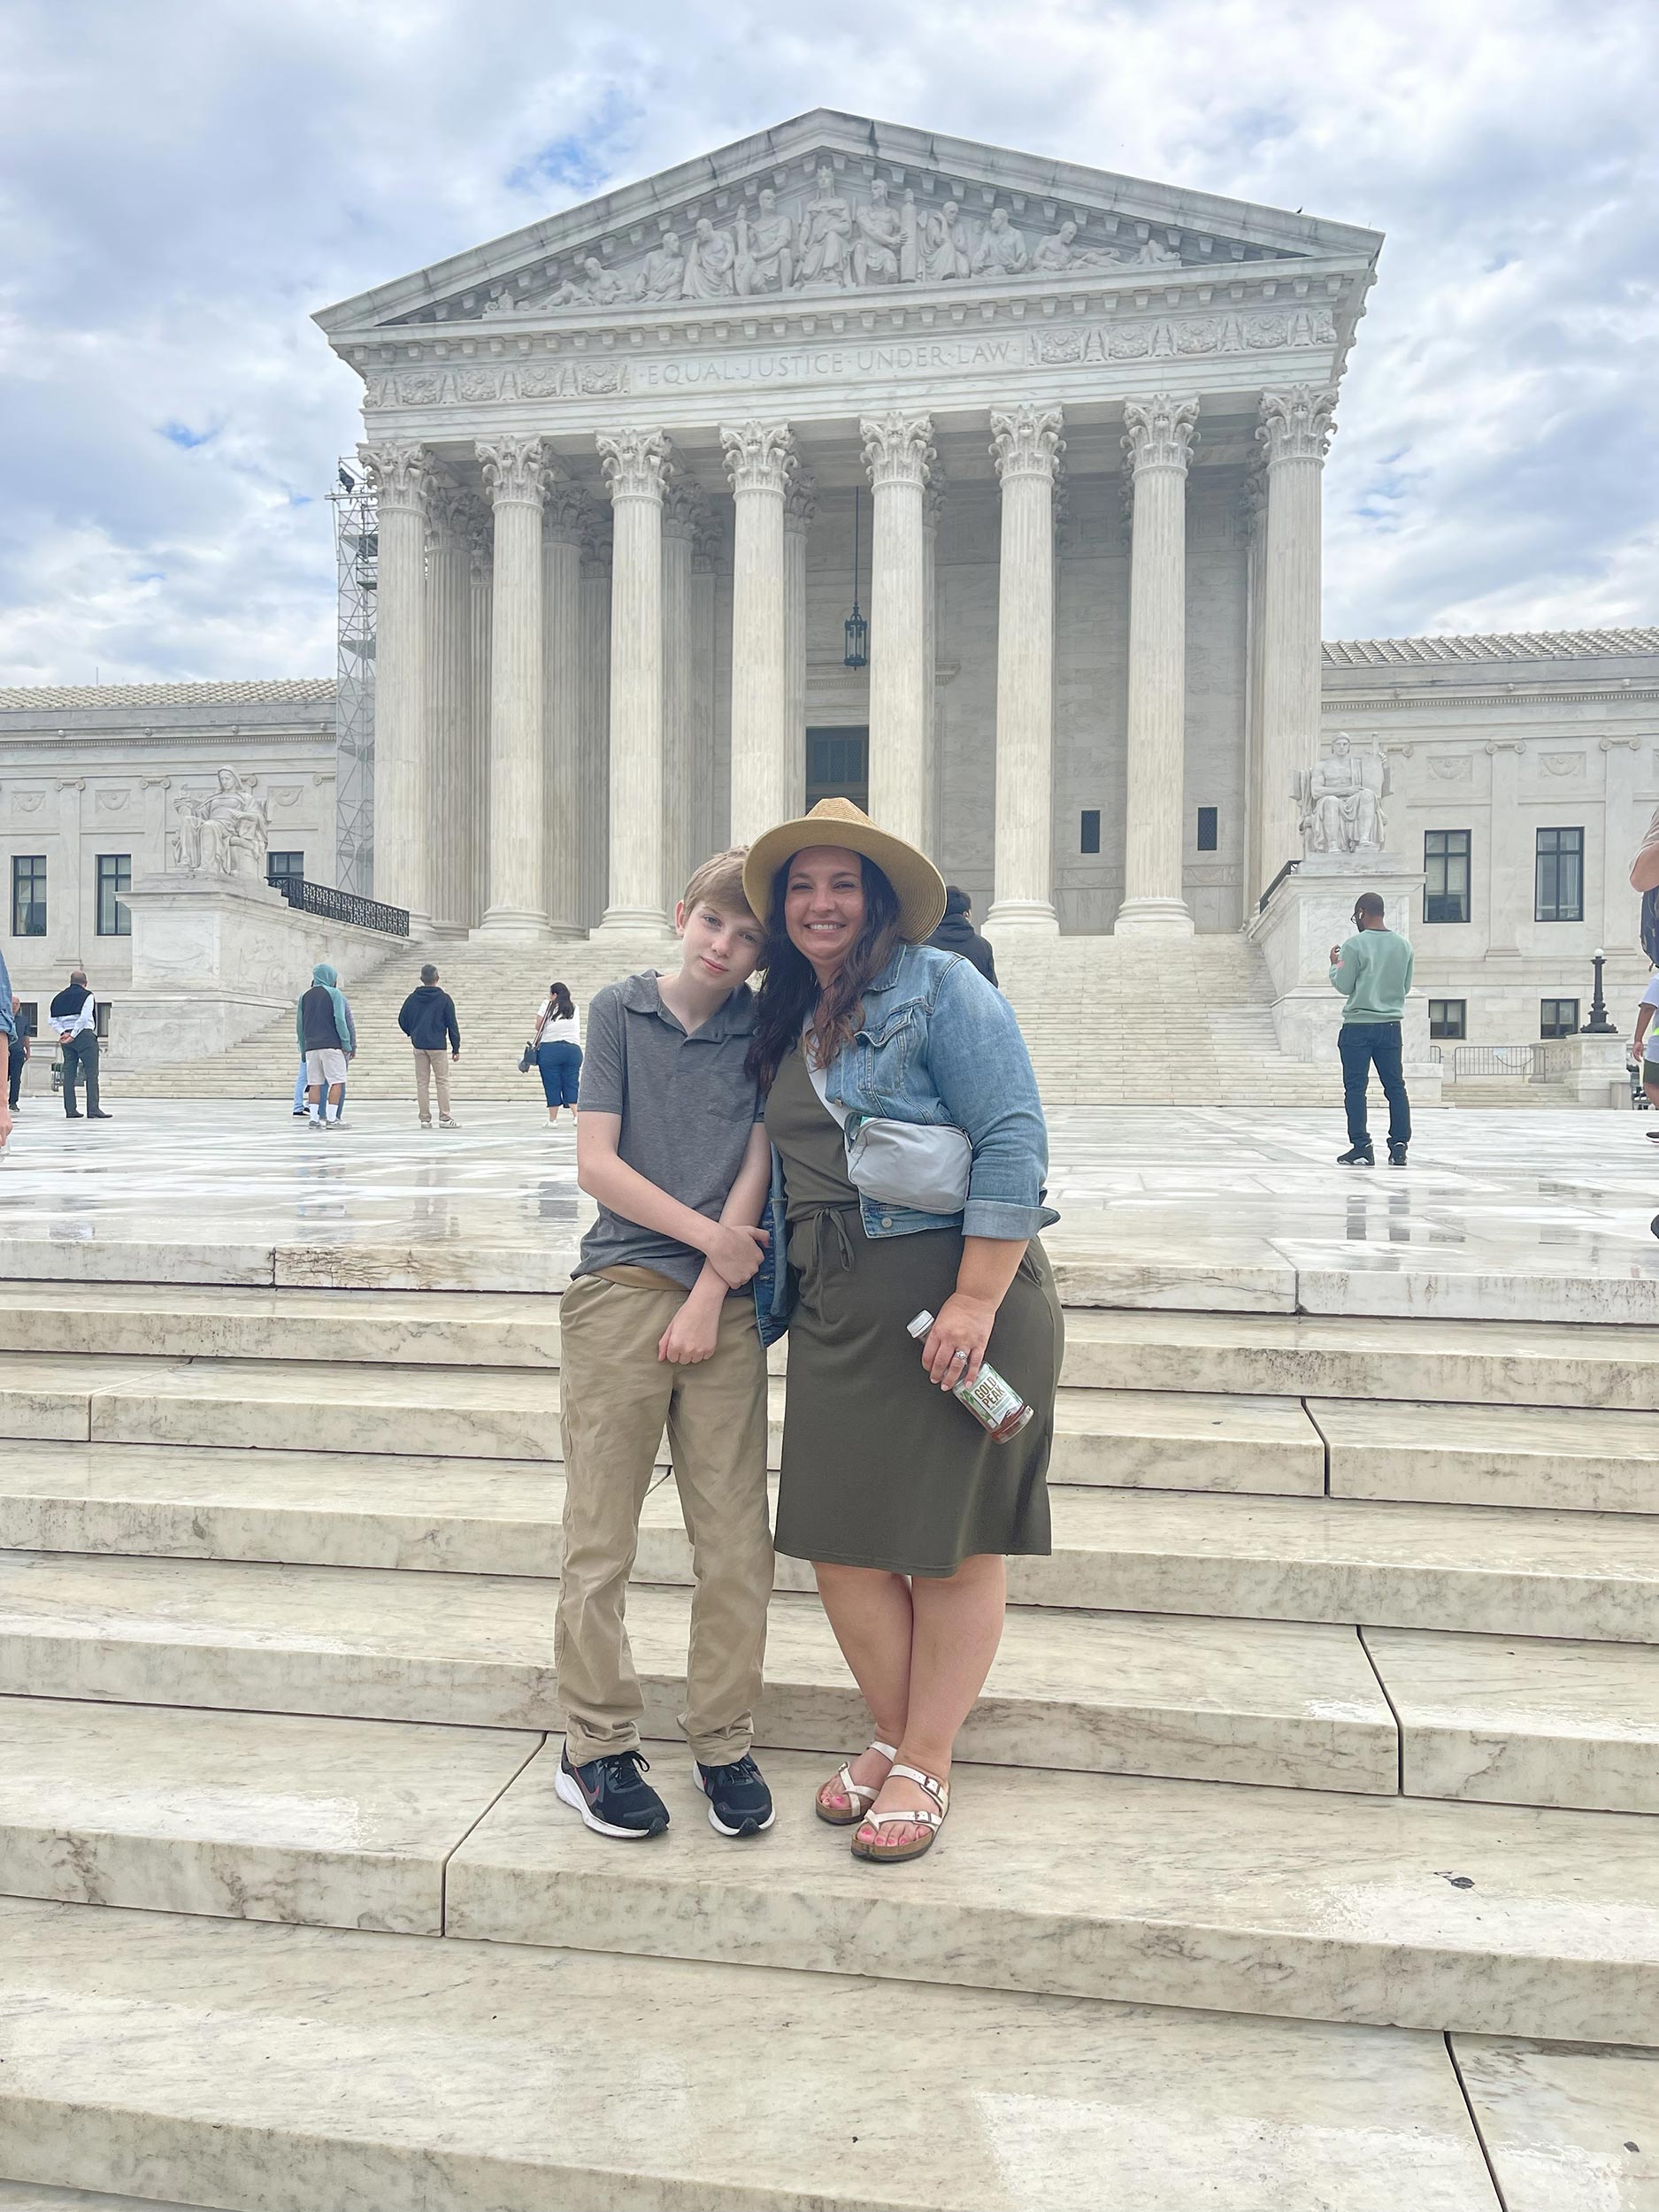 Christine and her son, Nolan, at the United States Supreme Court Building